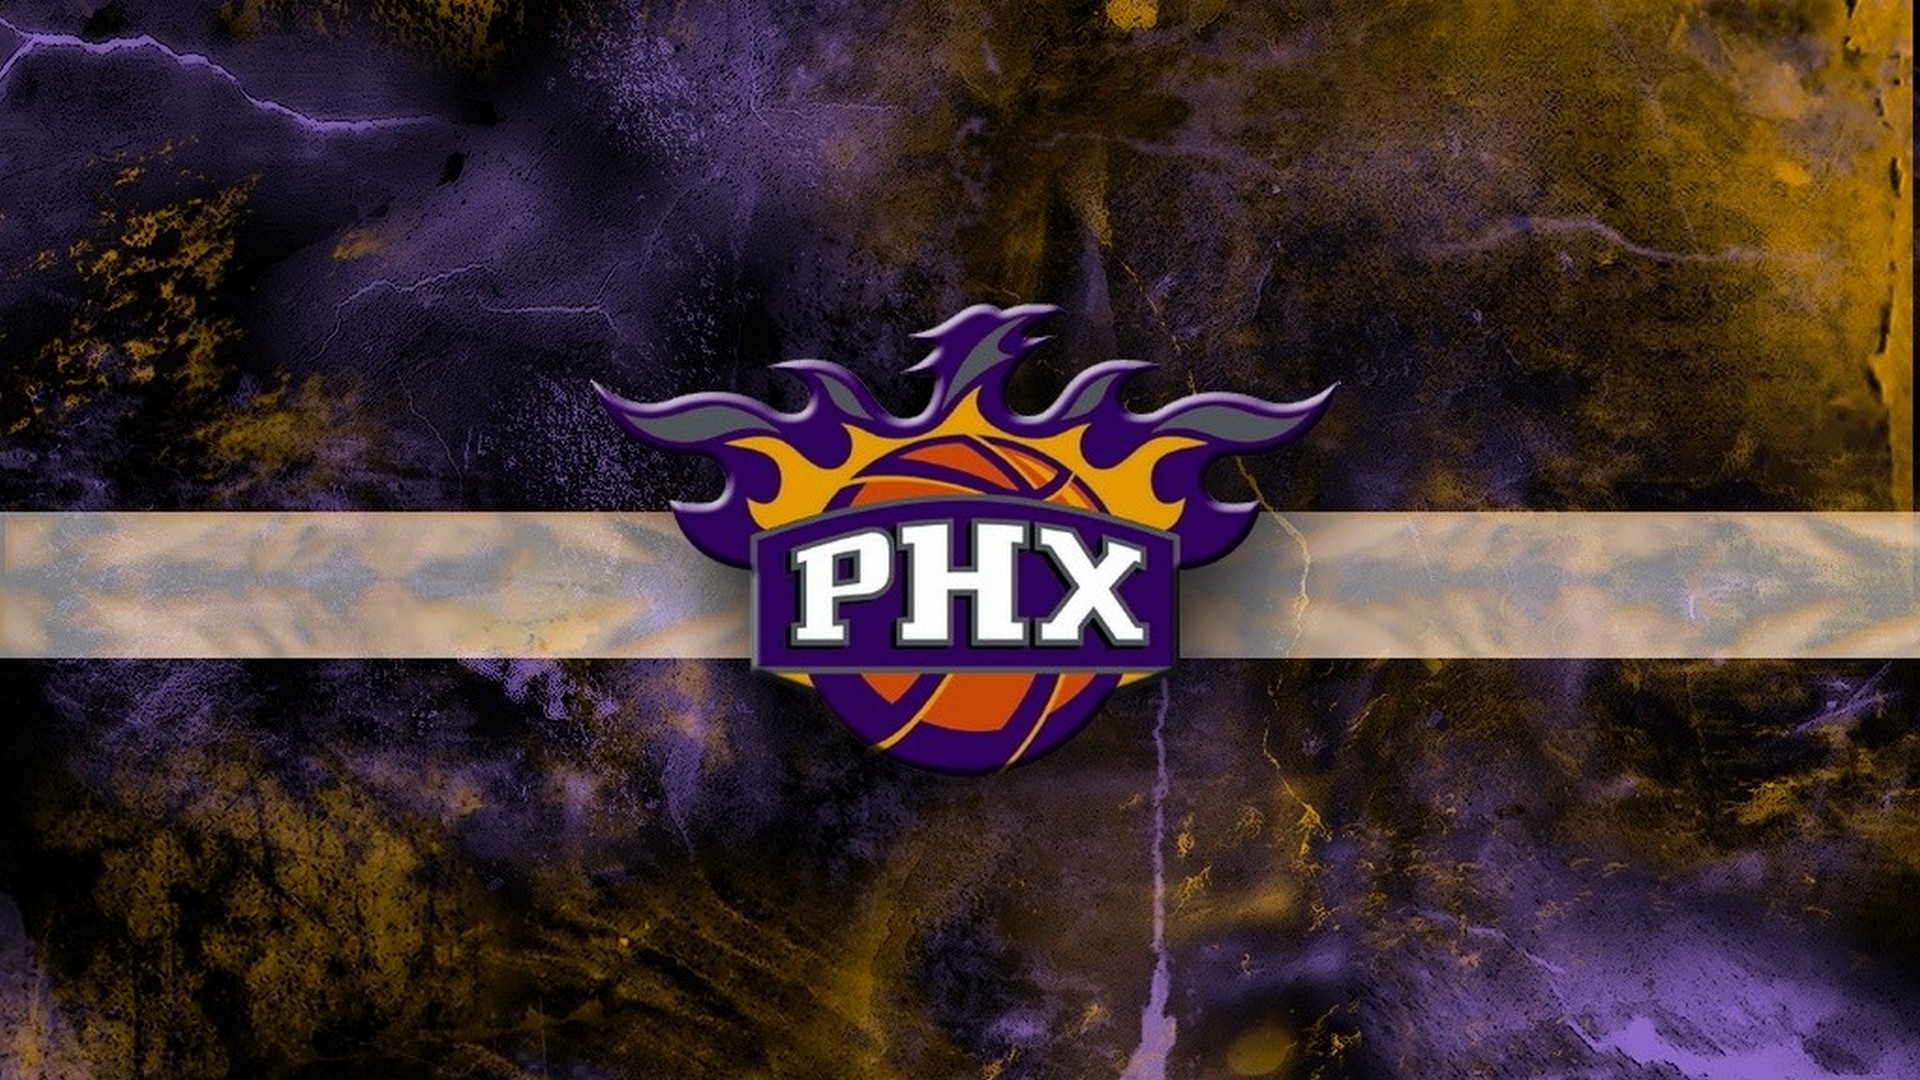 HD Desktop Wallpaper Phoenix Suns Logo with high-resolution 1920x1080 pixel. You can use this wallpaper for your Desktop Computer Backgrounds, Windows or Mac Screensavers, iPhone Lock screen, Tablet or Android and another Mobile Phone device